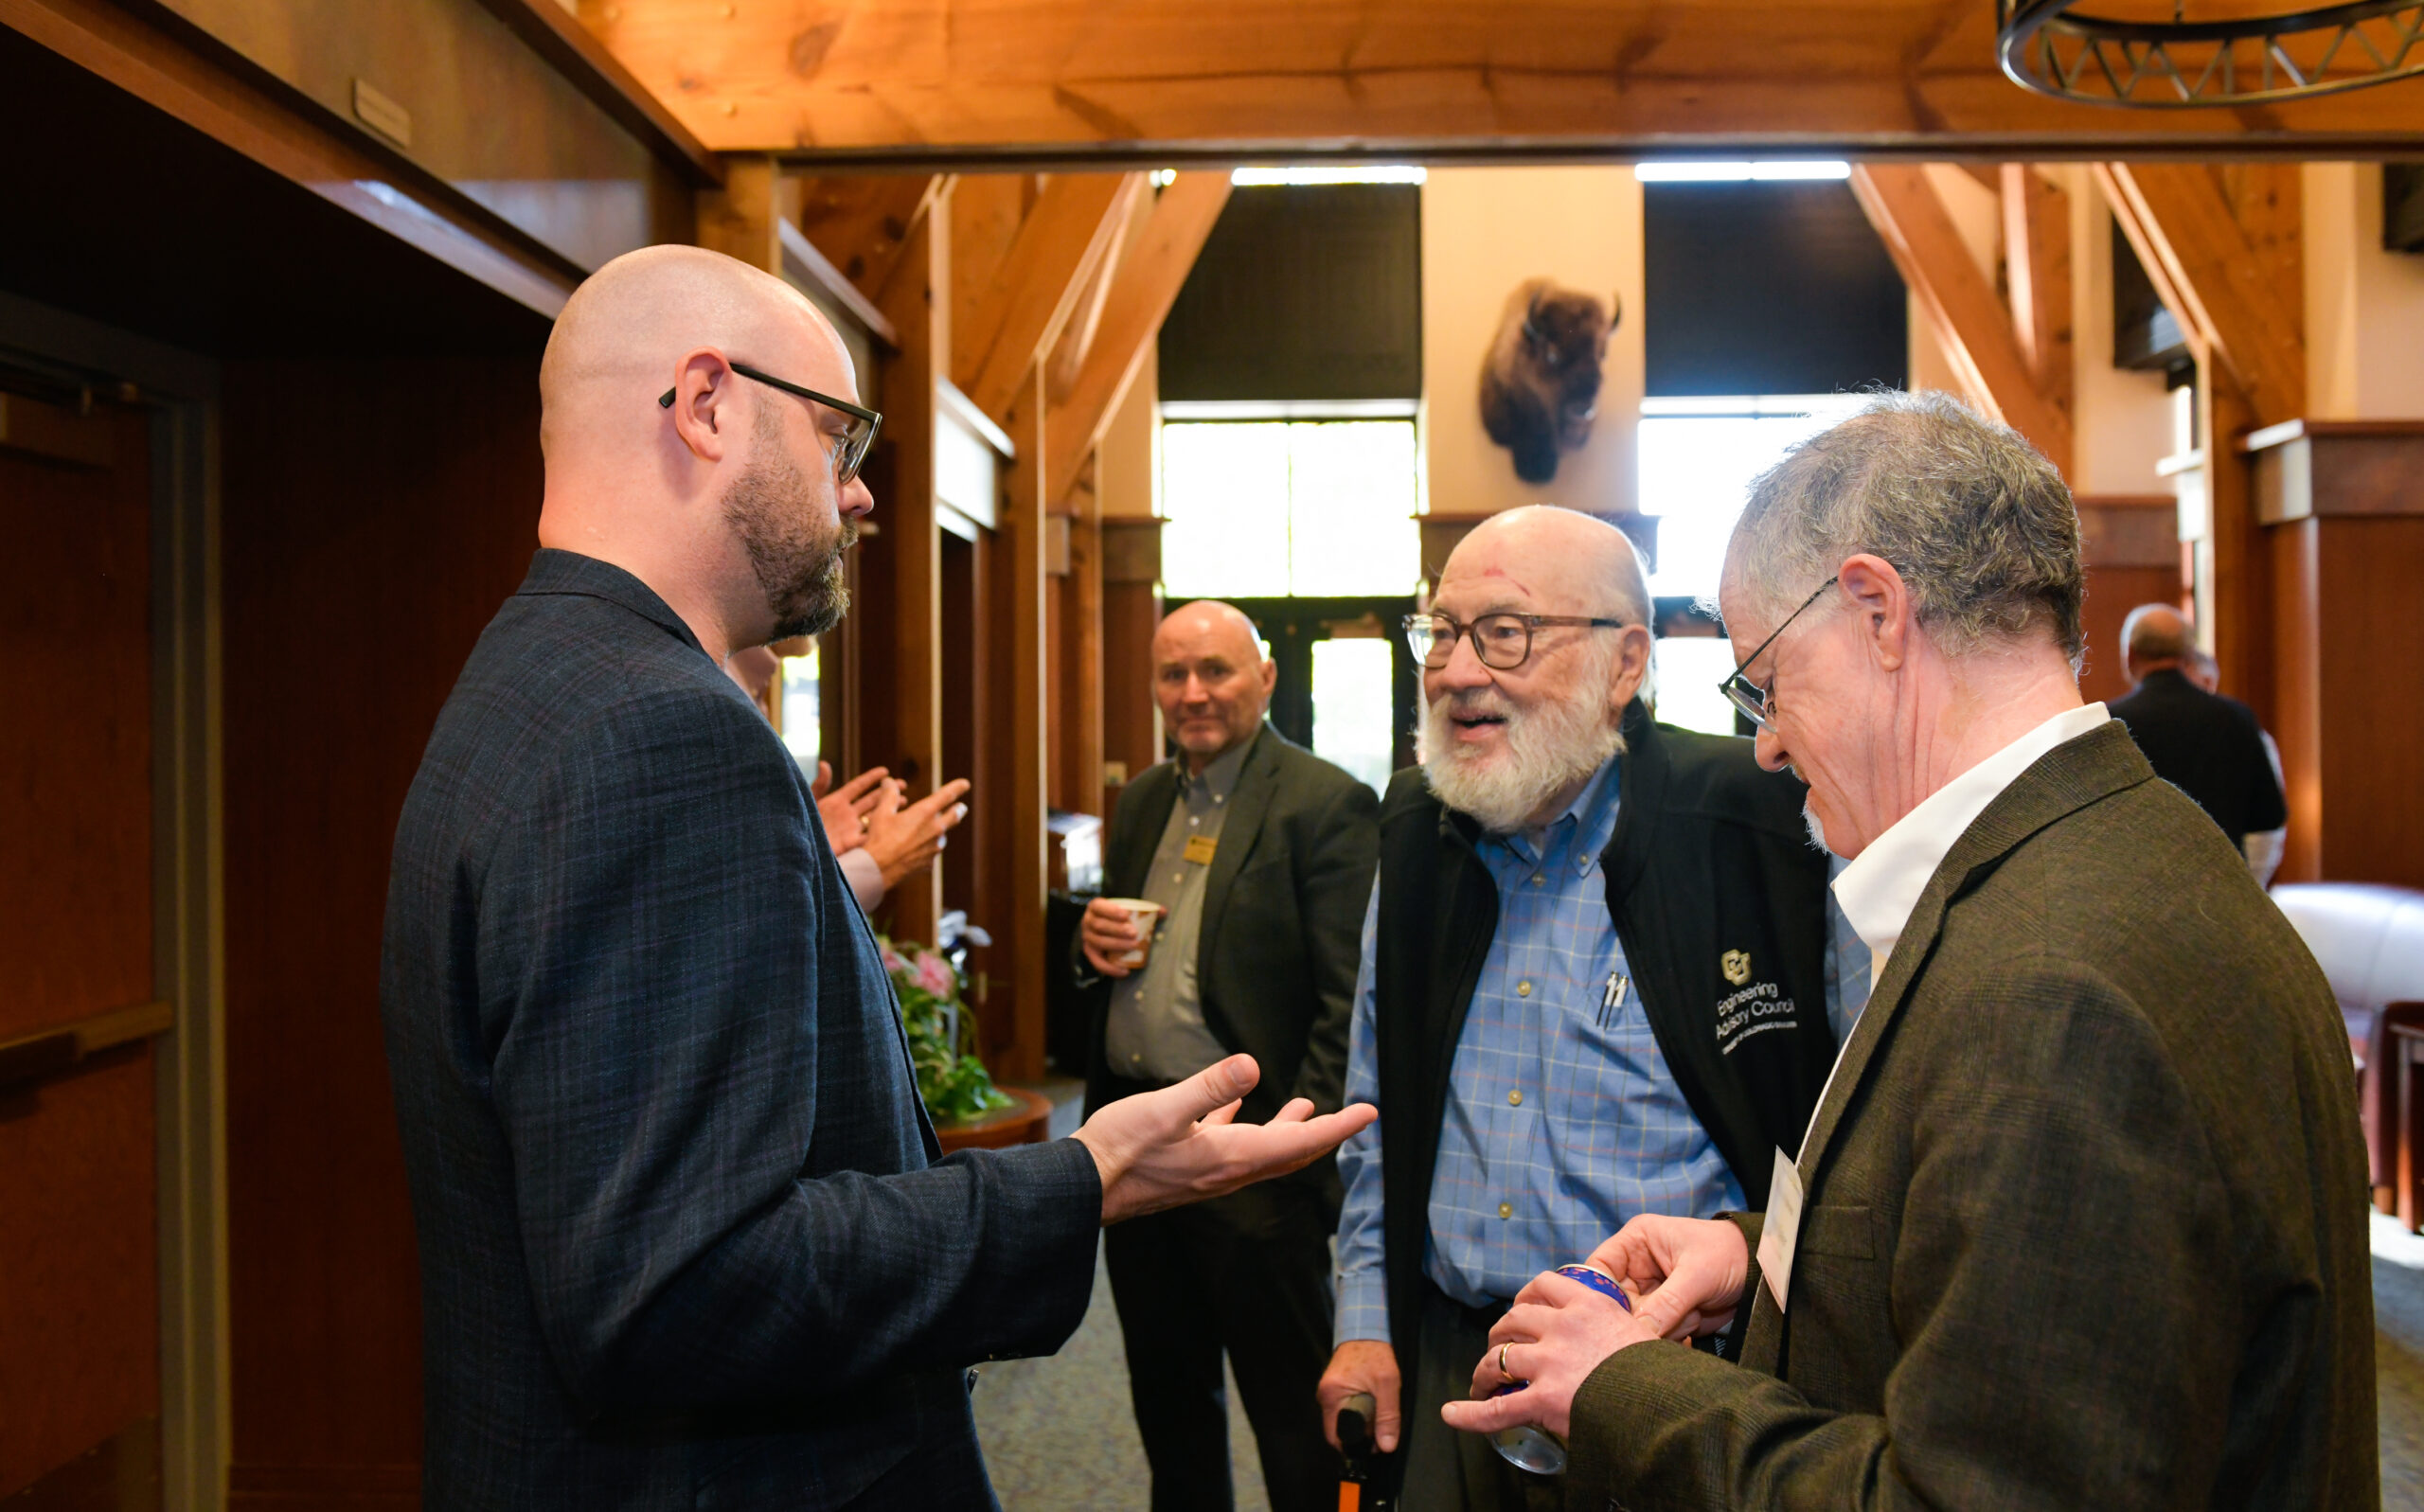 Spectrum Policy Makers, Stakeholders, and Researchers Gather at Silicon Flatirons Event